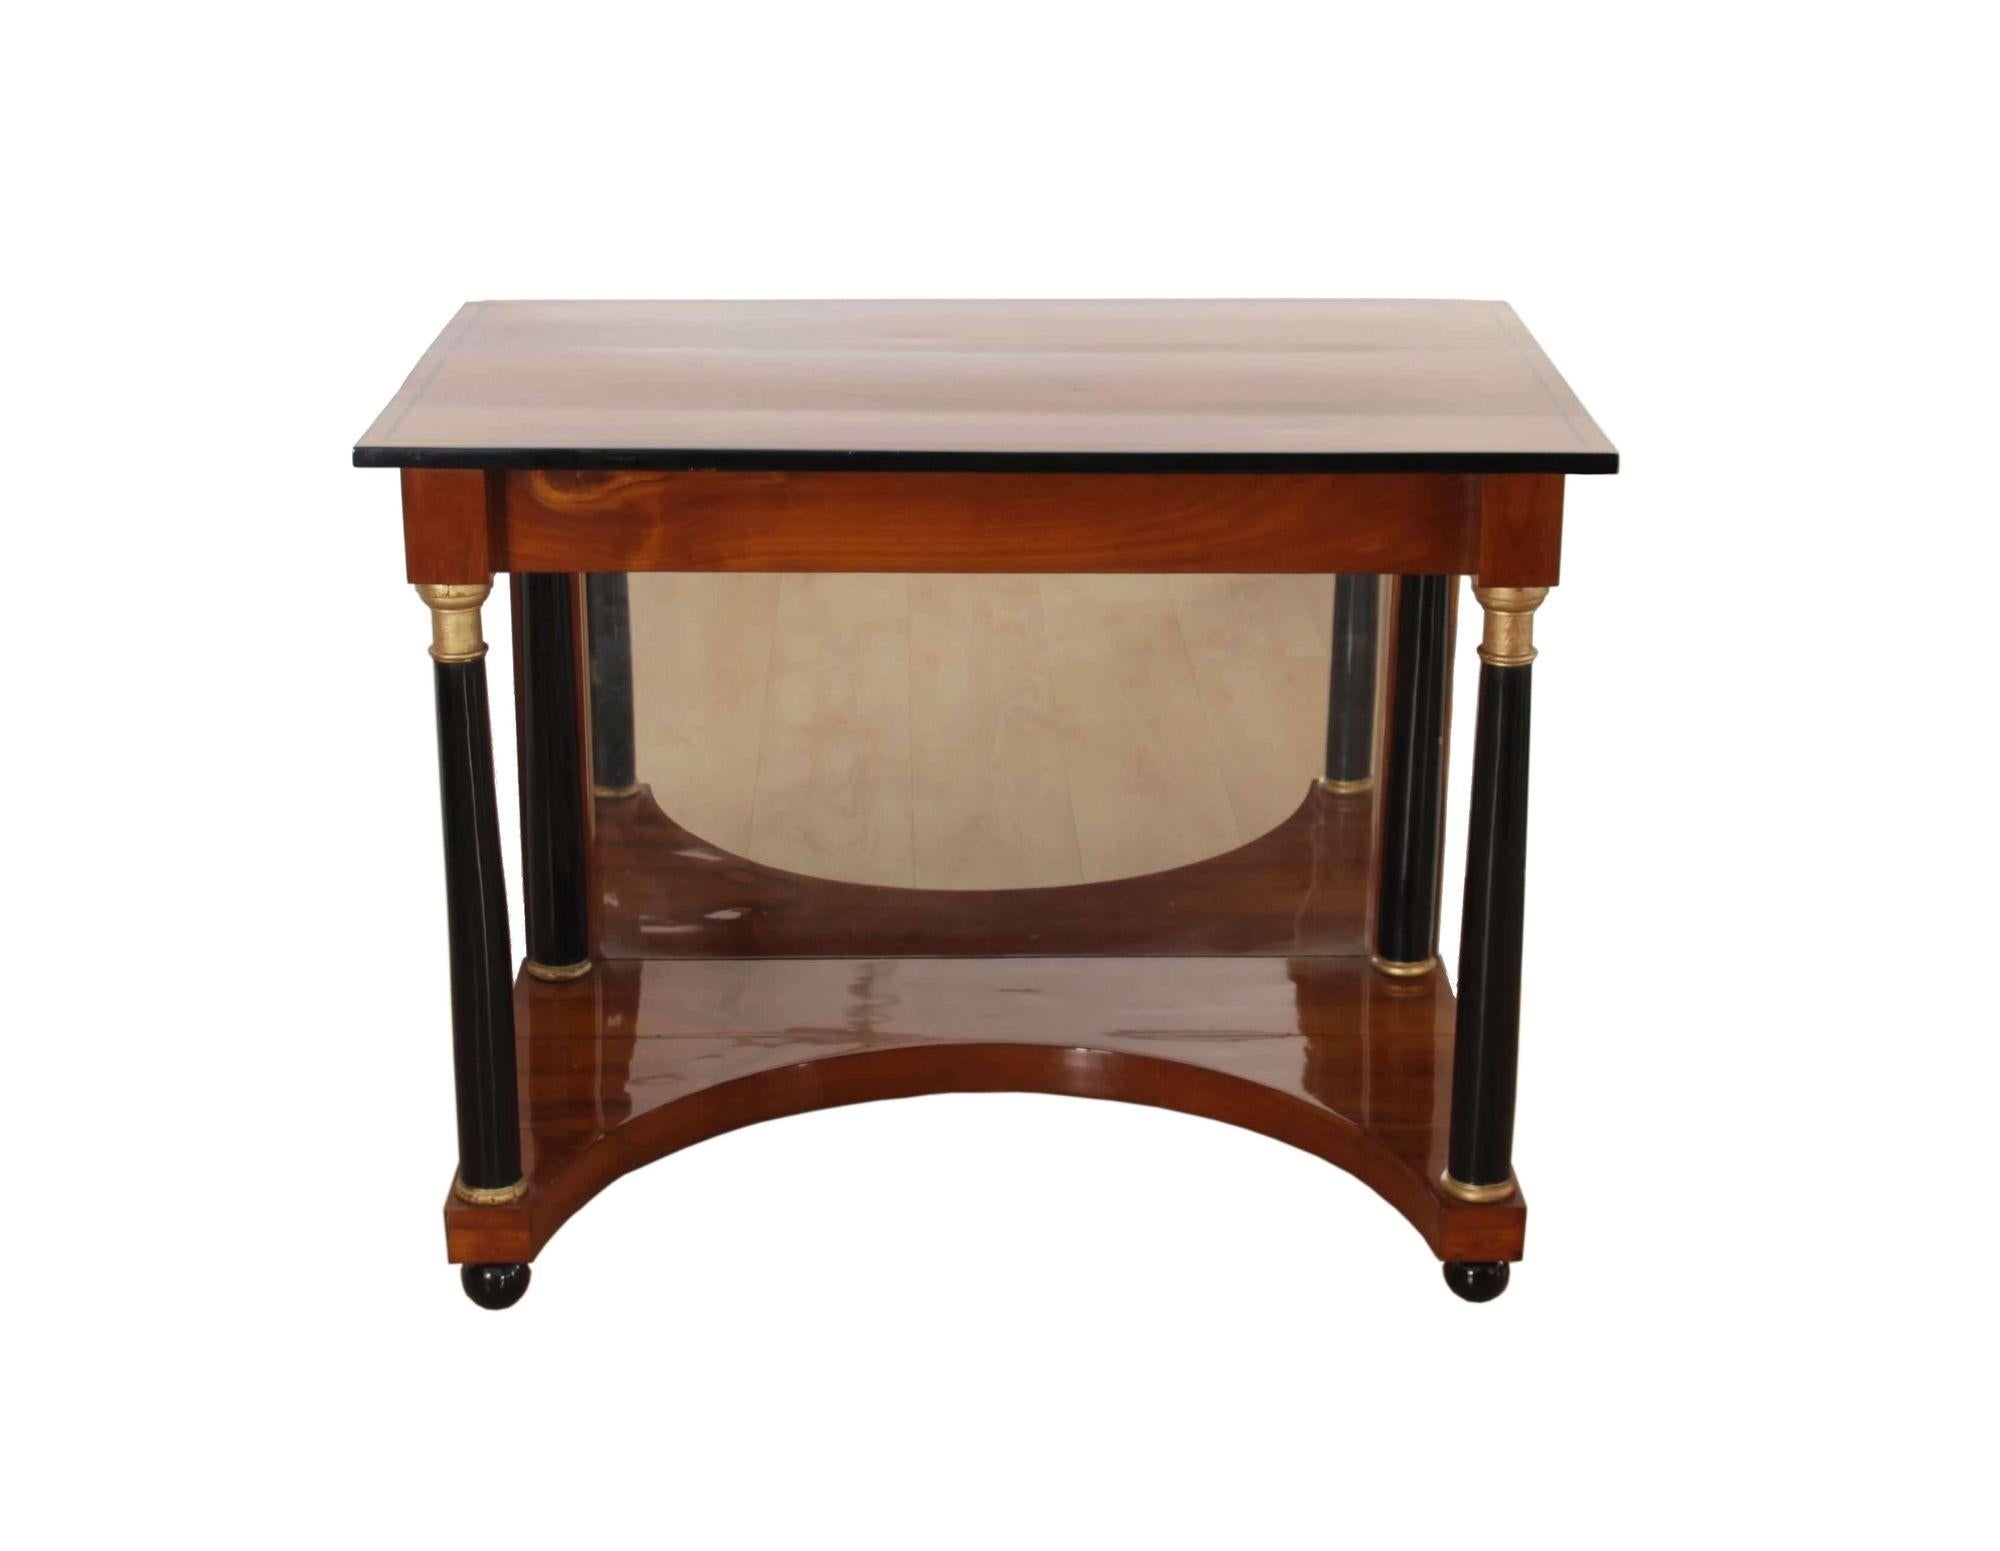 Elegant neoclassical Biedermeier Console Table from South Germany about 1820.

Concave base veneered in cherrywood in with mirror glass (replaced) in the back. The plate is cherry solid wood with ebonized parts and an ink trim. Hand-polished with